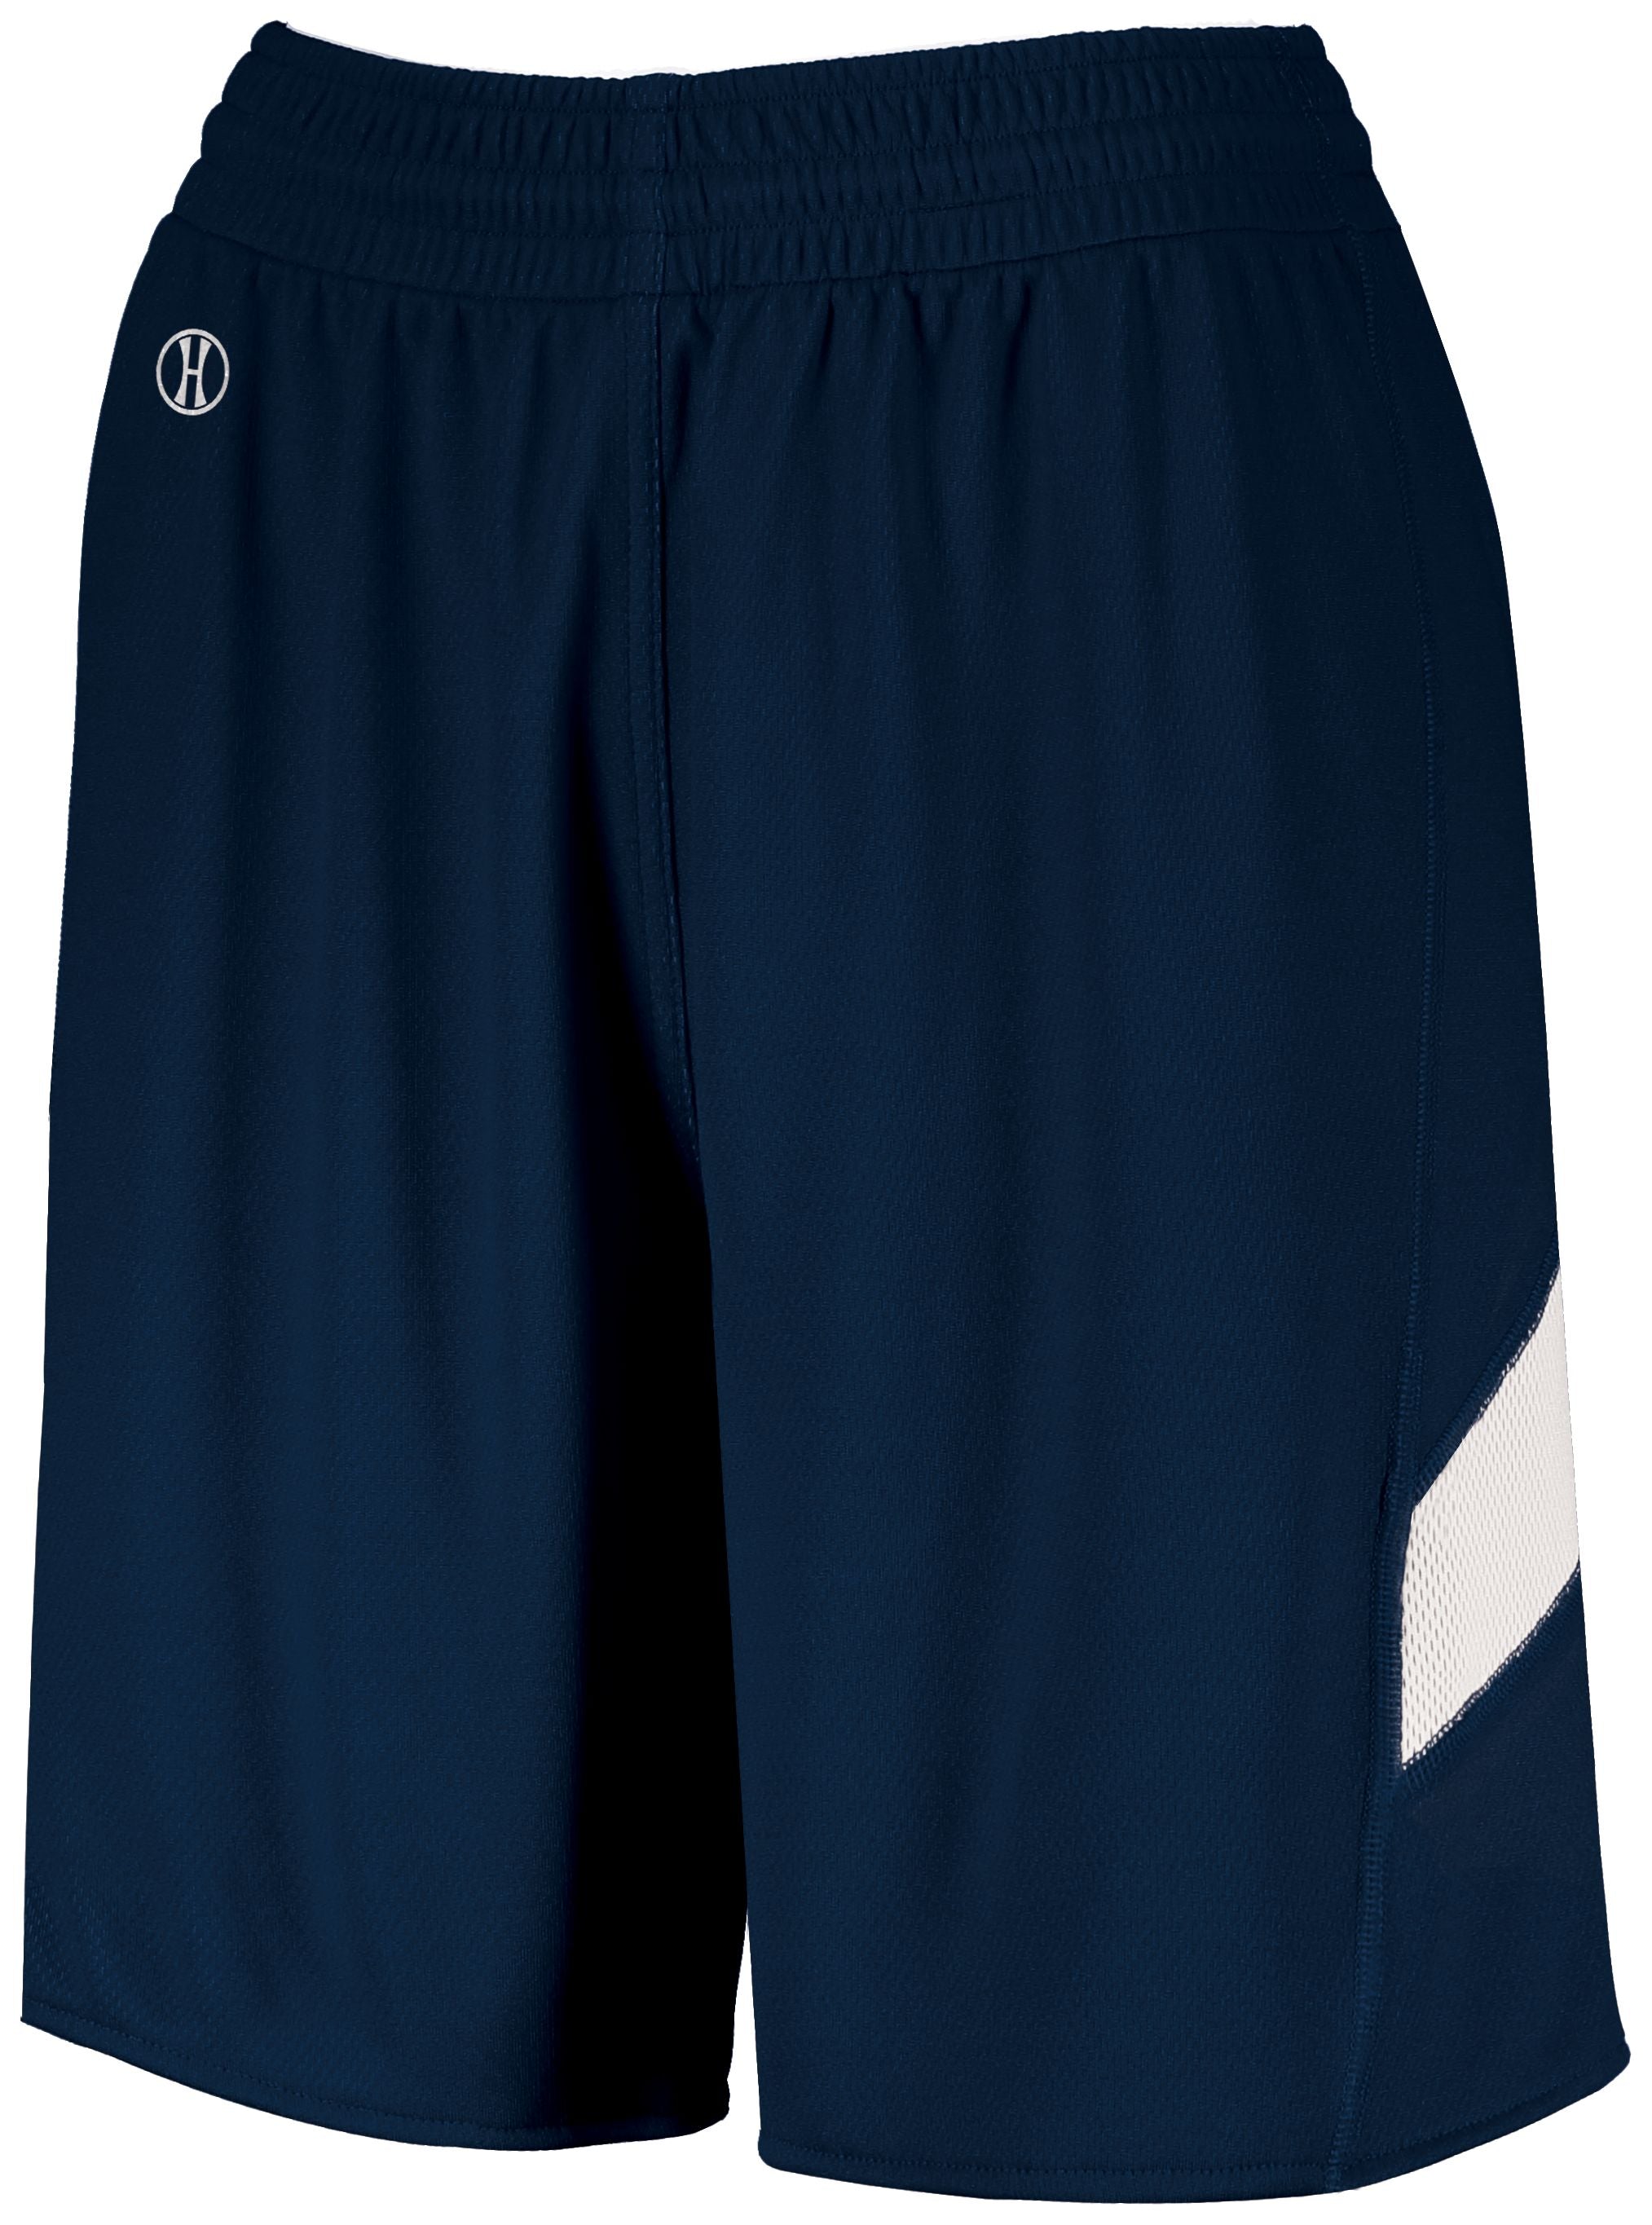 Holloway Ladies Dual-Side Single Ply Shorts in Navy/White  -Part of the Ladies, Ladies-Shorts, Basketball, Holloway, All-Sports, All-Sports-1 product lines at KanaleyCreations.com